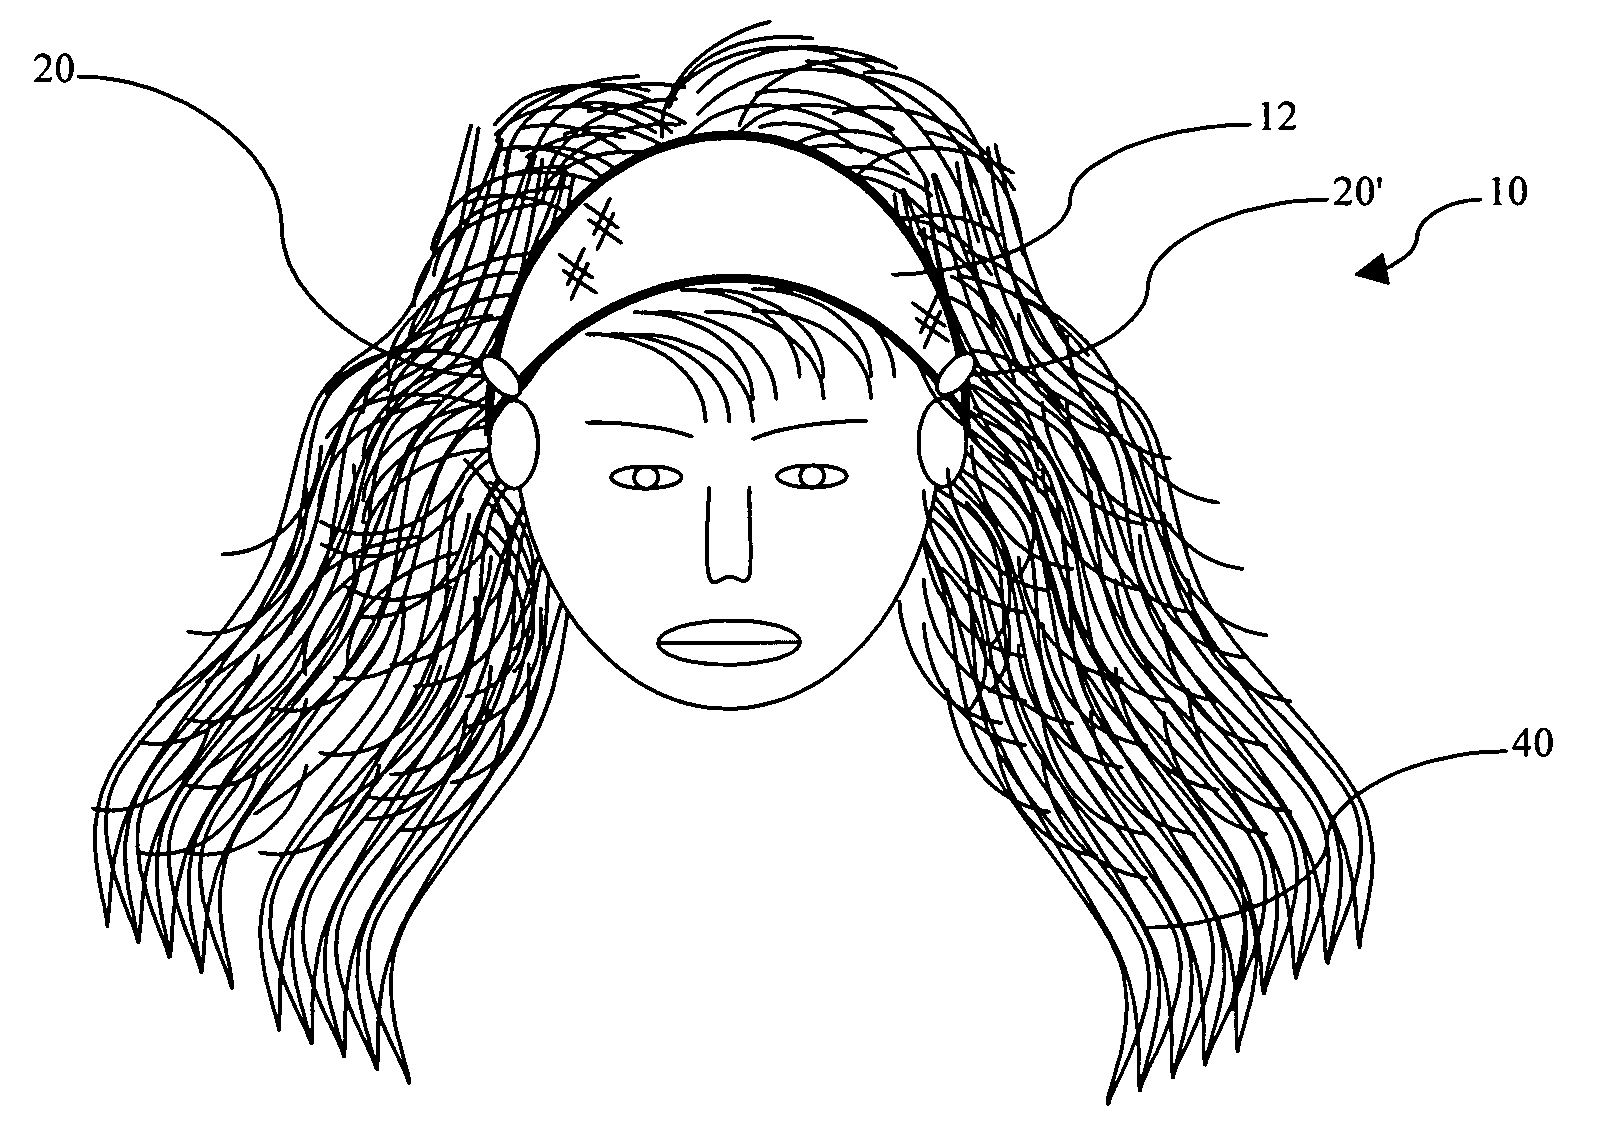 Adjustable headband and hair extension holding construction for attaching supplemental hair